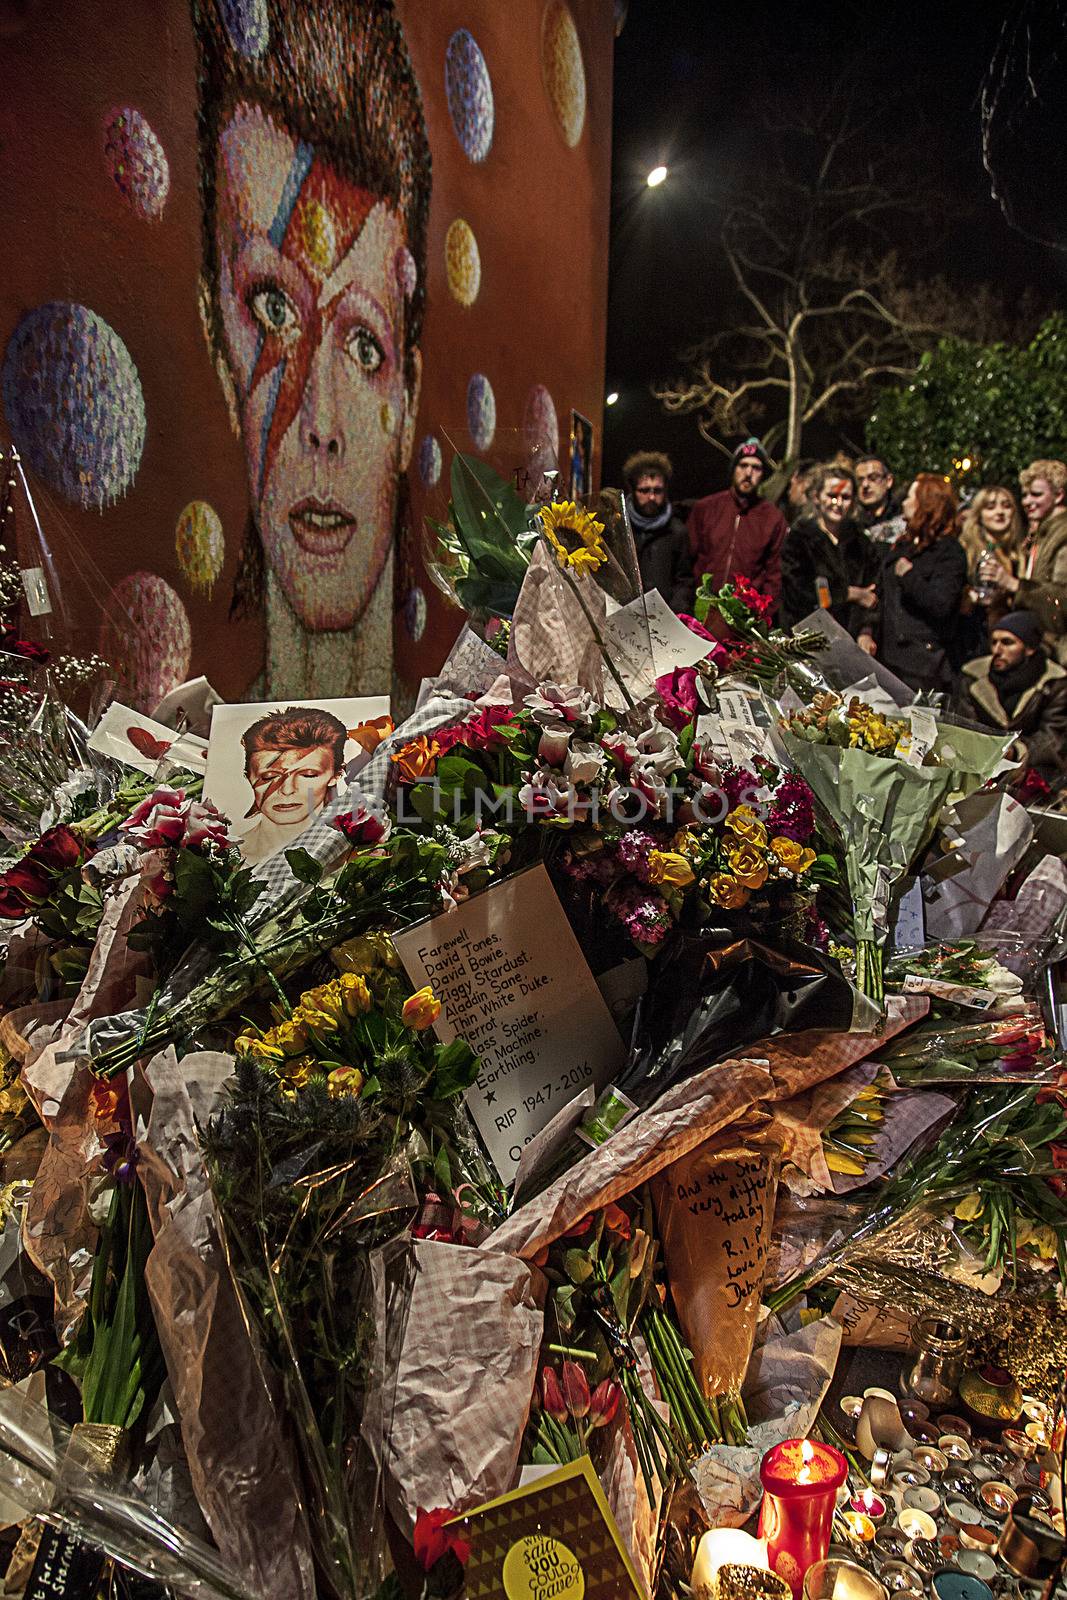 UNITED KINGDOM, London: Fans gather during a tribute party to British singer David Bowie on January 11, 2015 in Brixton, South London. British music icon David Bowie died of cancer at the age of 69, drawing an outpouring of tributes for the innovative star famed for groundbreaking hits like Ziggy Stardust and his theatrical shape-shifting style. 